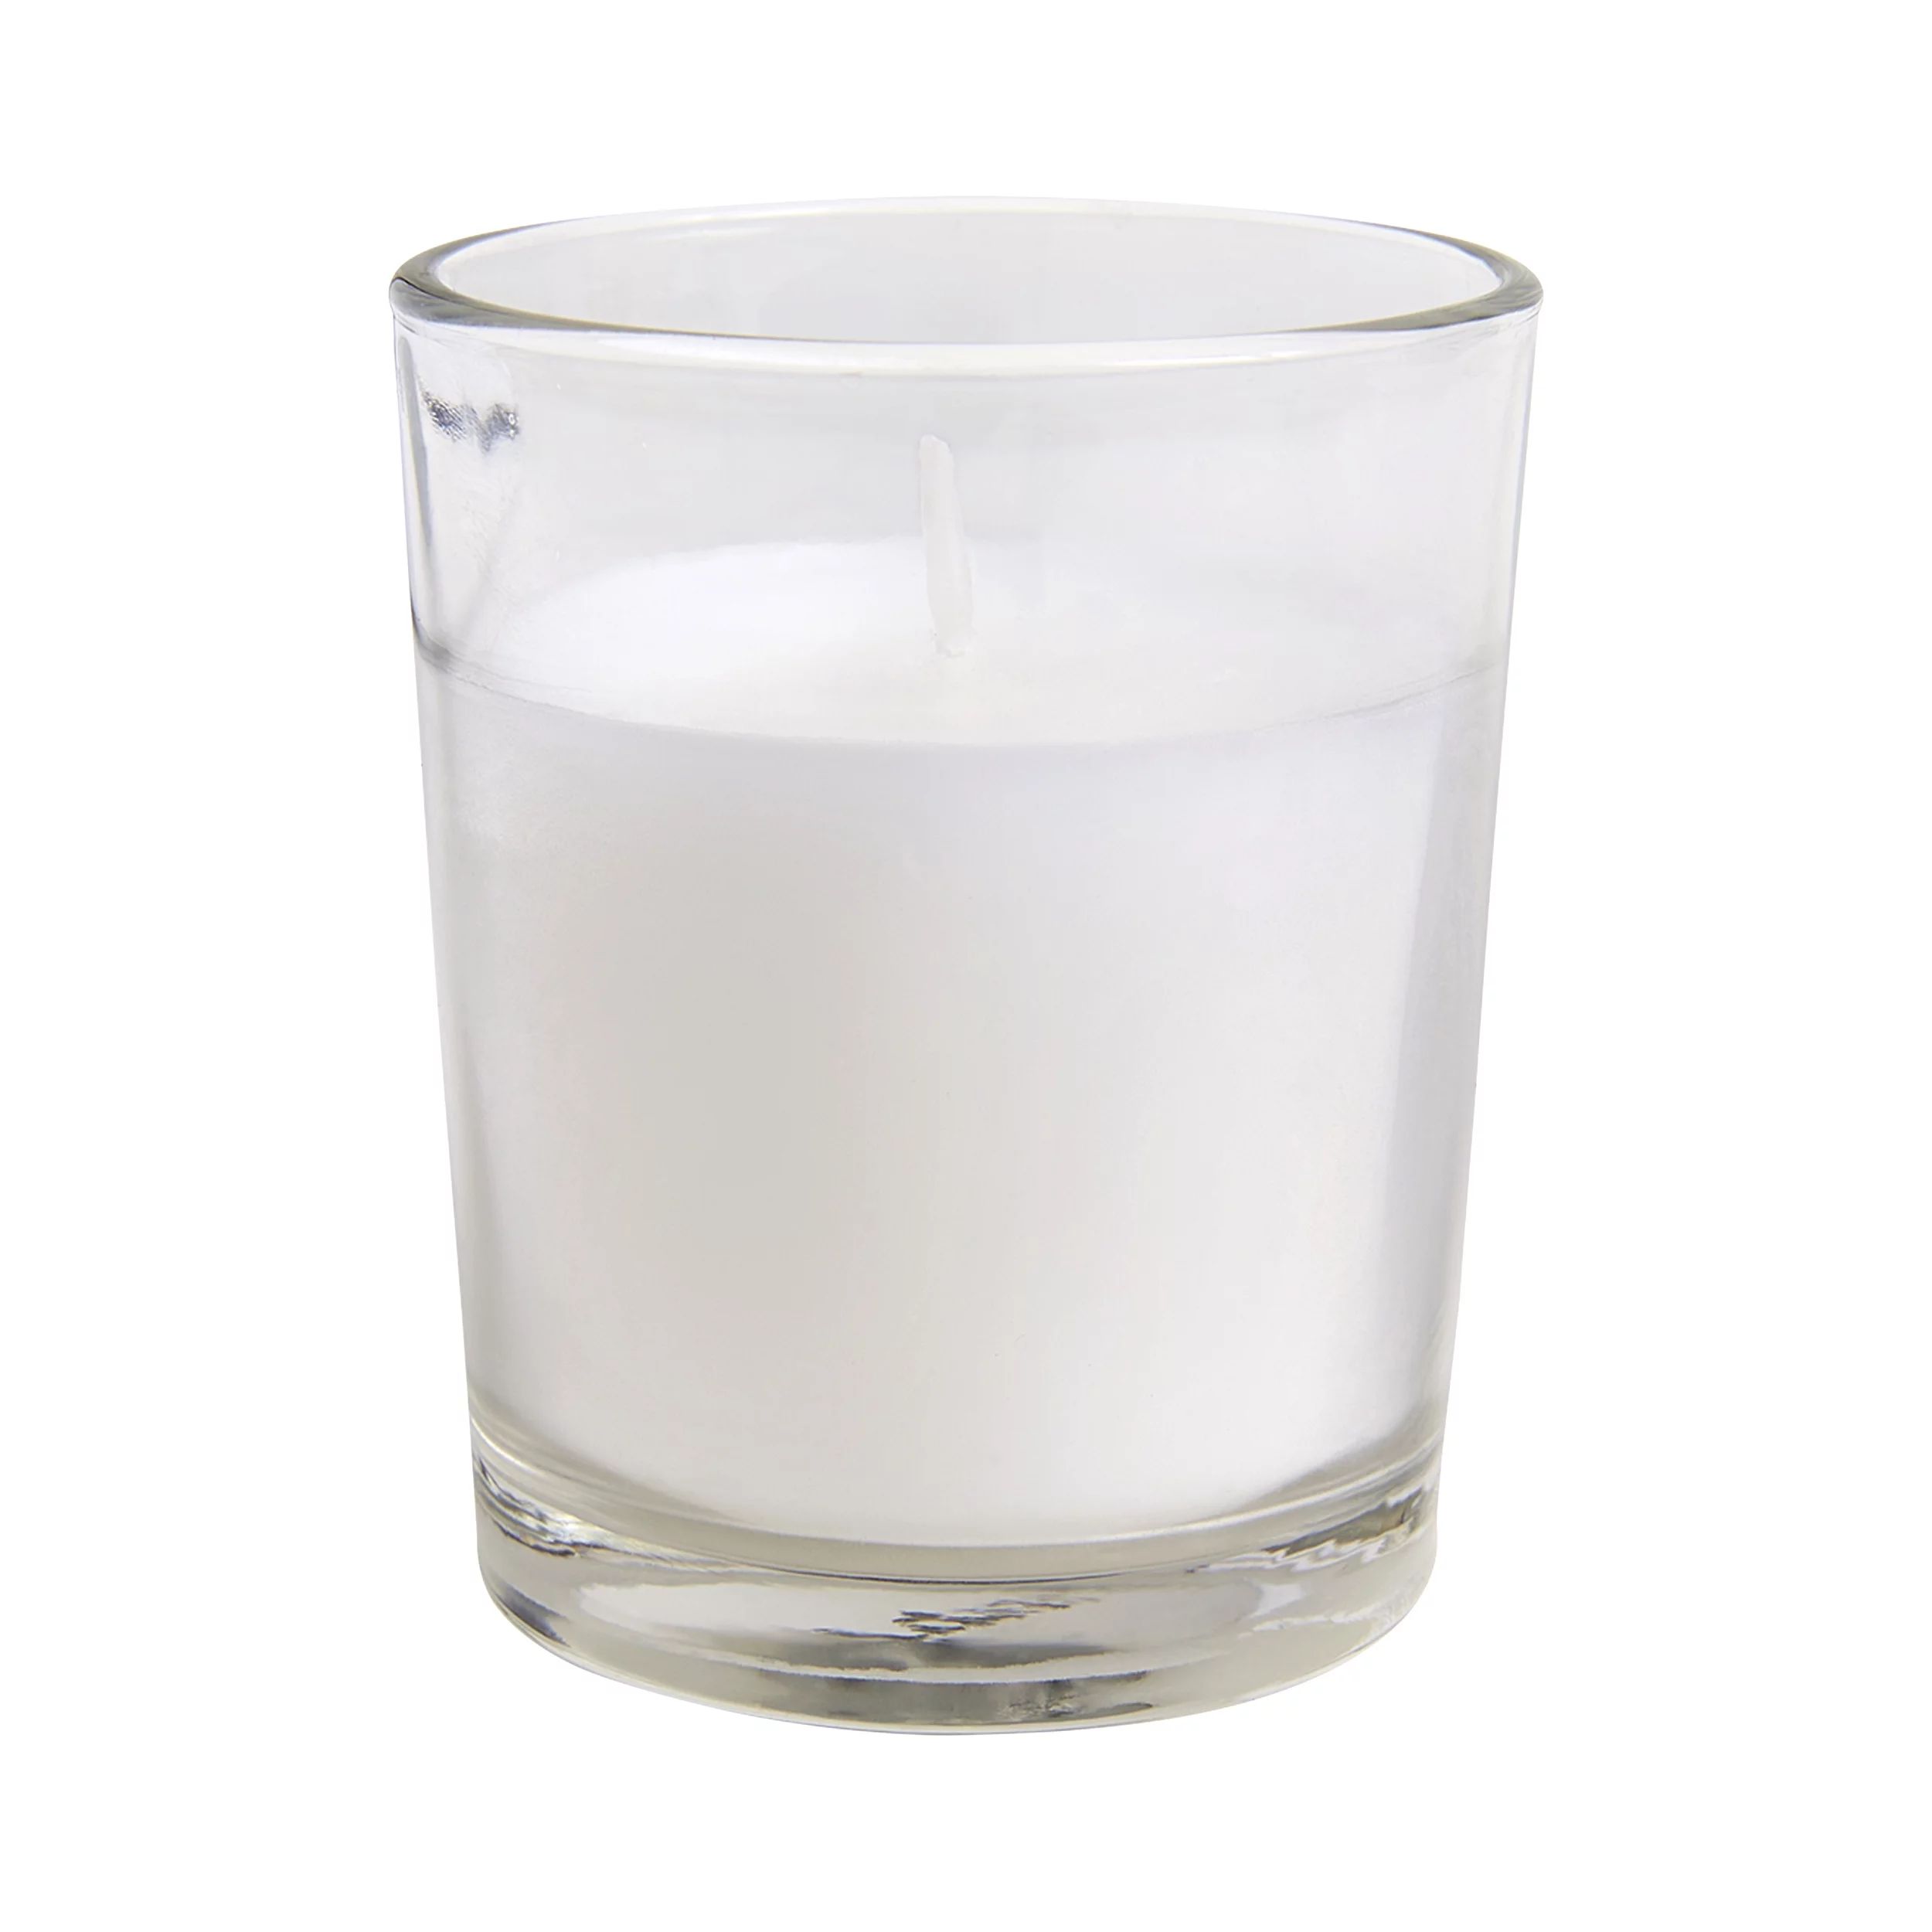 Mainstays Unscented Filled Votive Glass Candles, White, 12-Pack Votive Candles | Walmart (US)